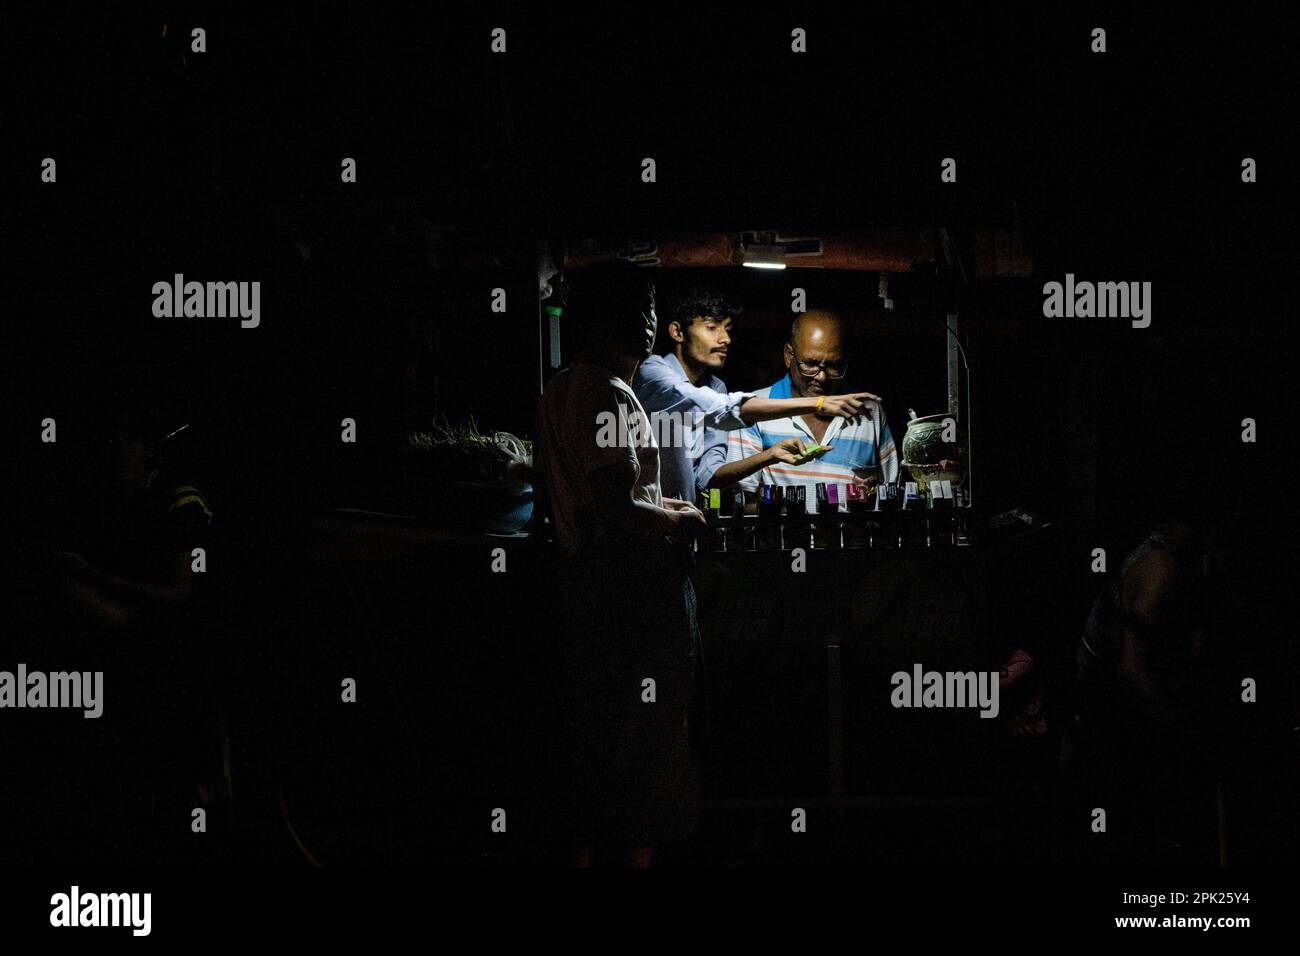 April 2, 2023, Yangon, Myanmar: Betel nut vendors prepare their product under a tiny lamp powered by a generator during a blackout on the street in Yangon. Due to soaring costs and the lack of hydropower during the dry season, the military junta (Tatmadaw) rations electricity throughout Yangon daily, leaving large sections of the city (townships) completely blacked out everyday. Daily life during the deadly civil war in Myanmar. On February 1, 2021, the military junta government (Tatmadaw) seized power by coup, jailing the democratically-elected government and plunging the country into an ongo Stock Photo